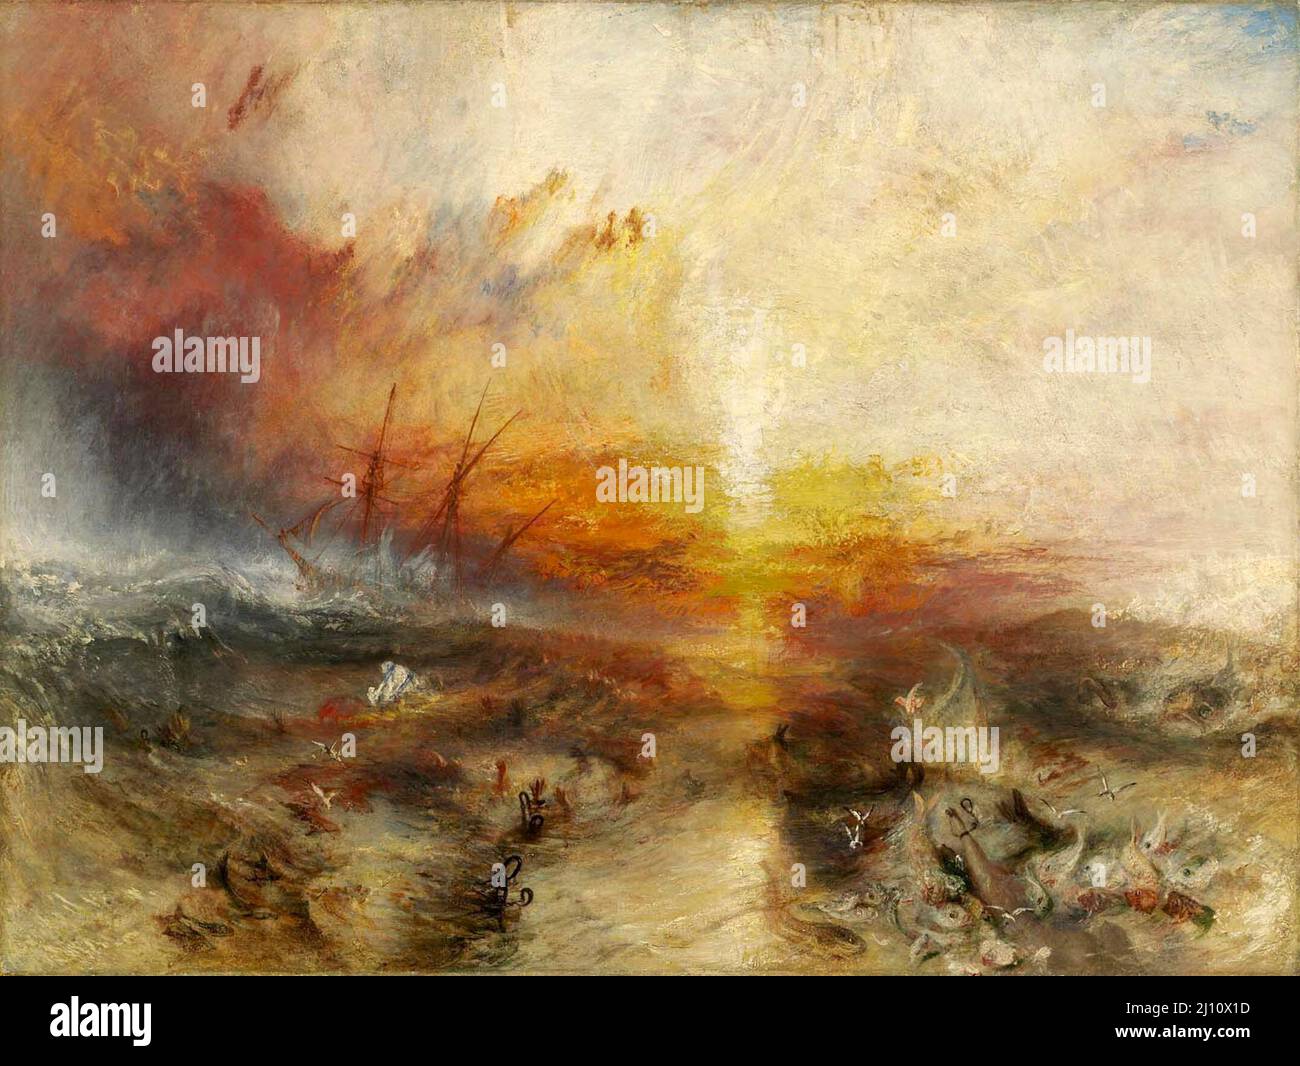 The Slave Ship,  formerly known as Slavers throwing overboard the Dead and Dying — Typhoon coming on.  J. M. W. Turner. 1840.  It is thought that Turner may have been influenced by the infamous case of the slave ship Zong. Stock Photo